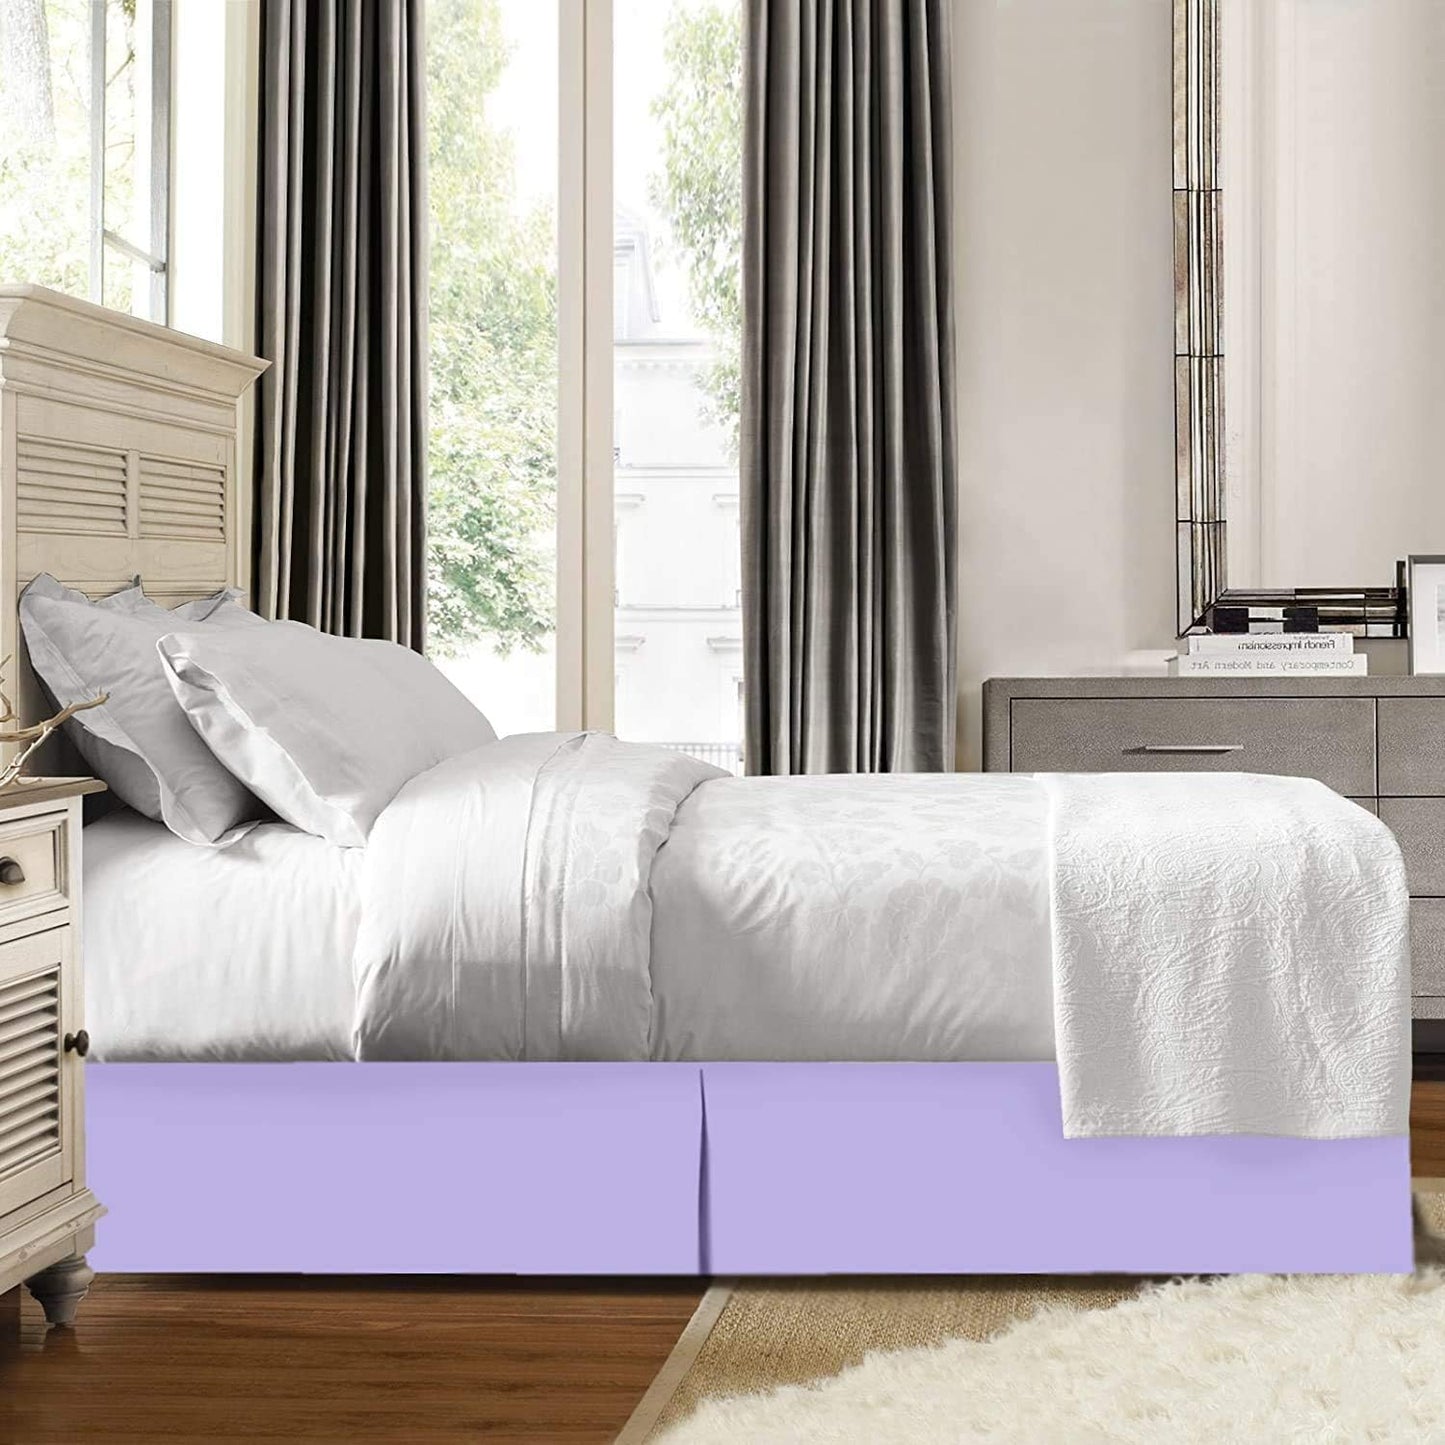 Buy Split Corner Pleated Bed Skirt Lavender 22" Inch Drop Egyptian Cotton at-egyptianhomelinens.com